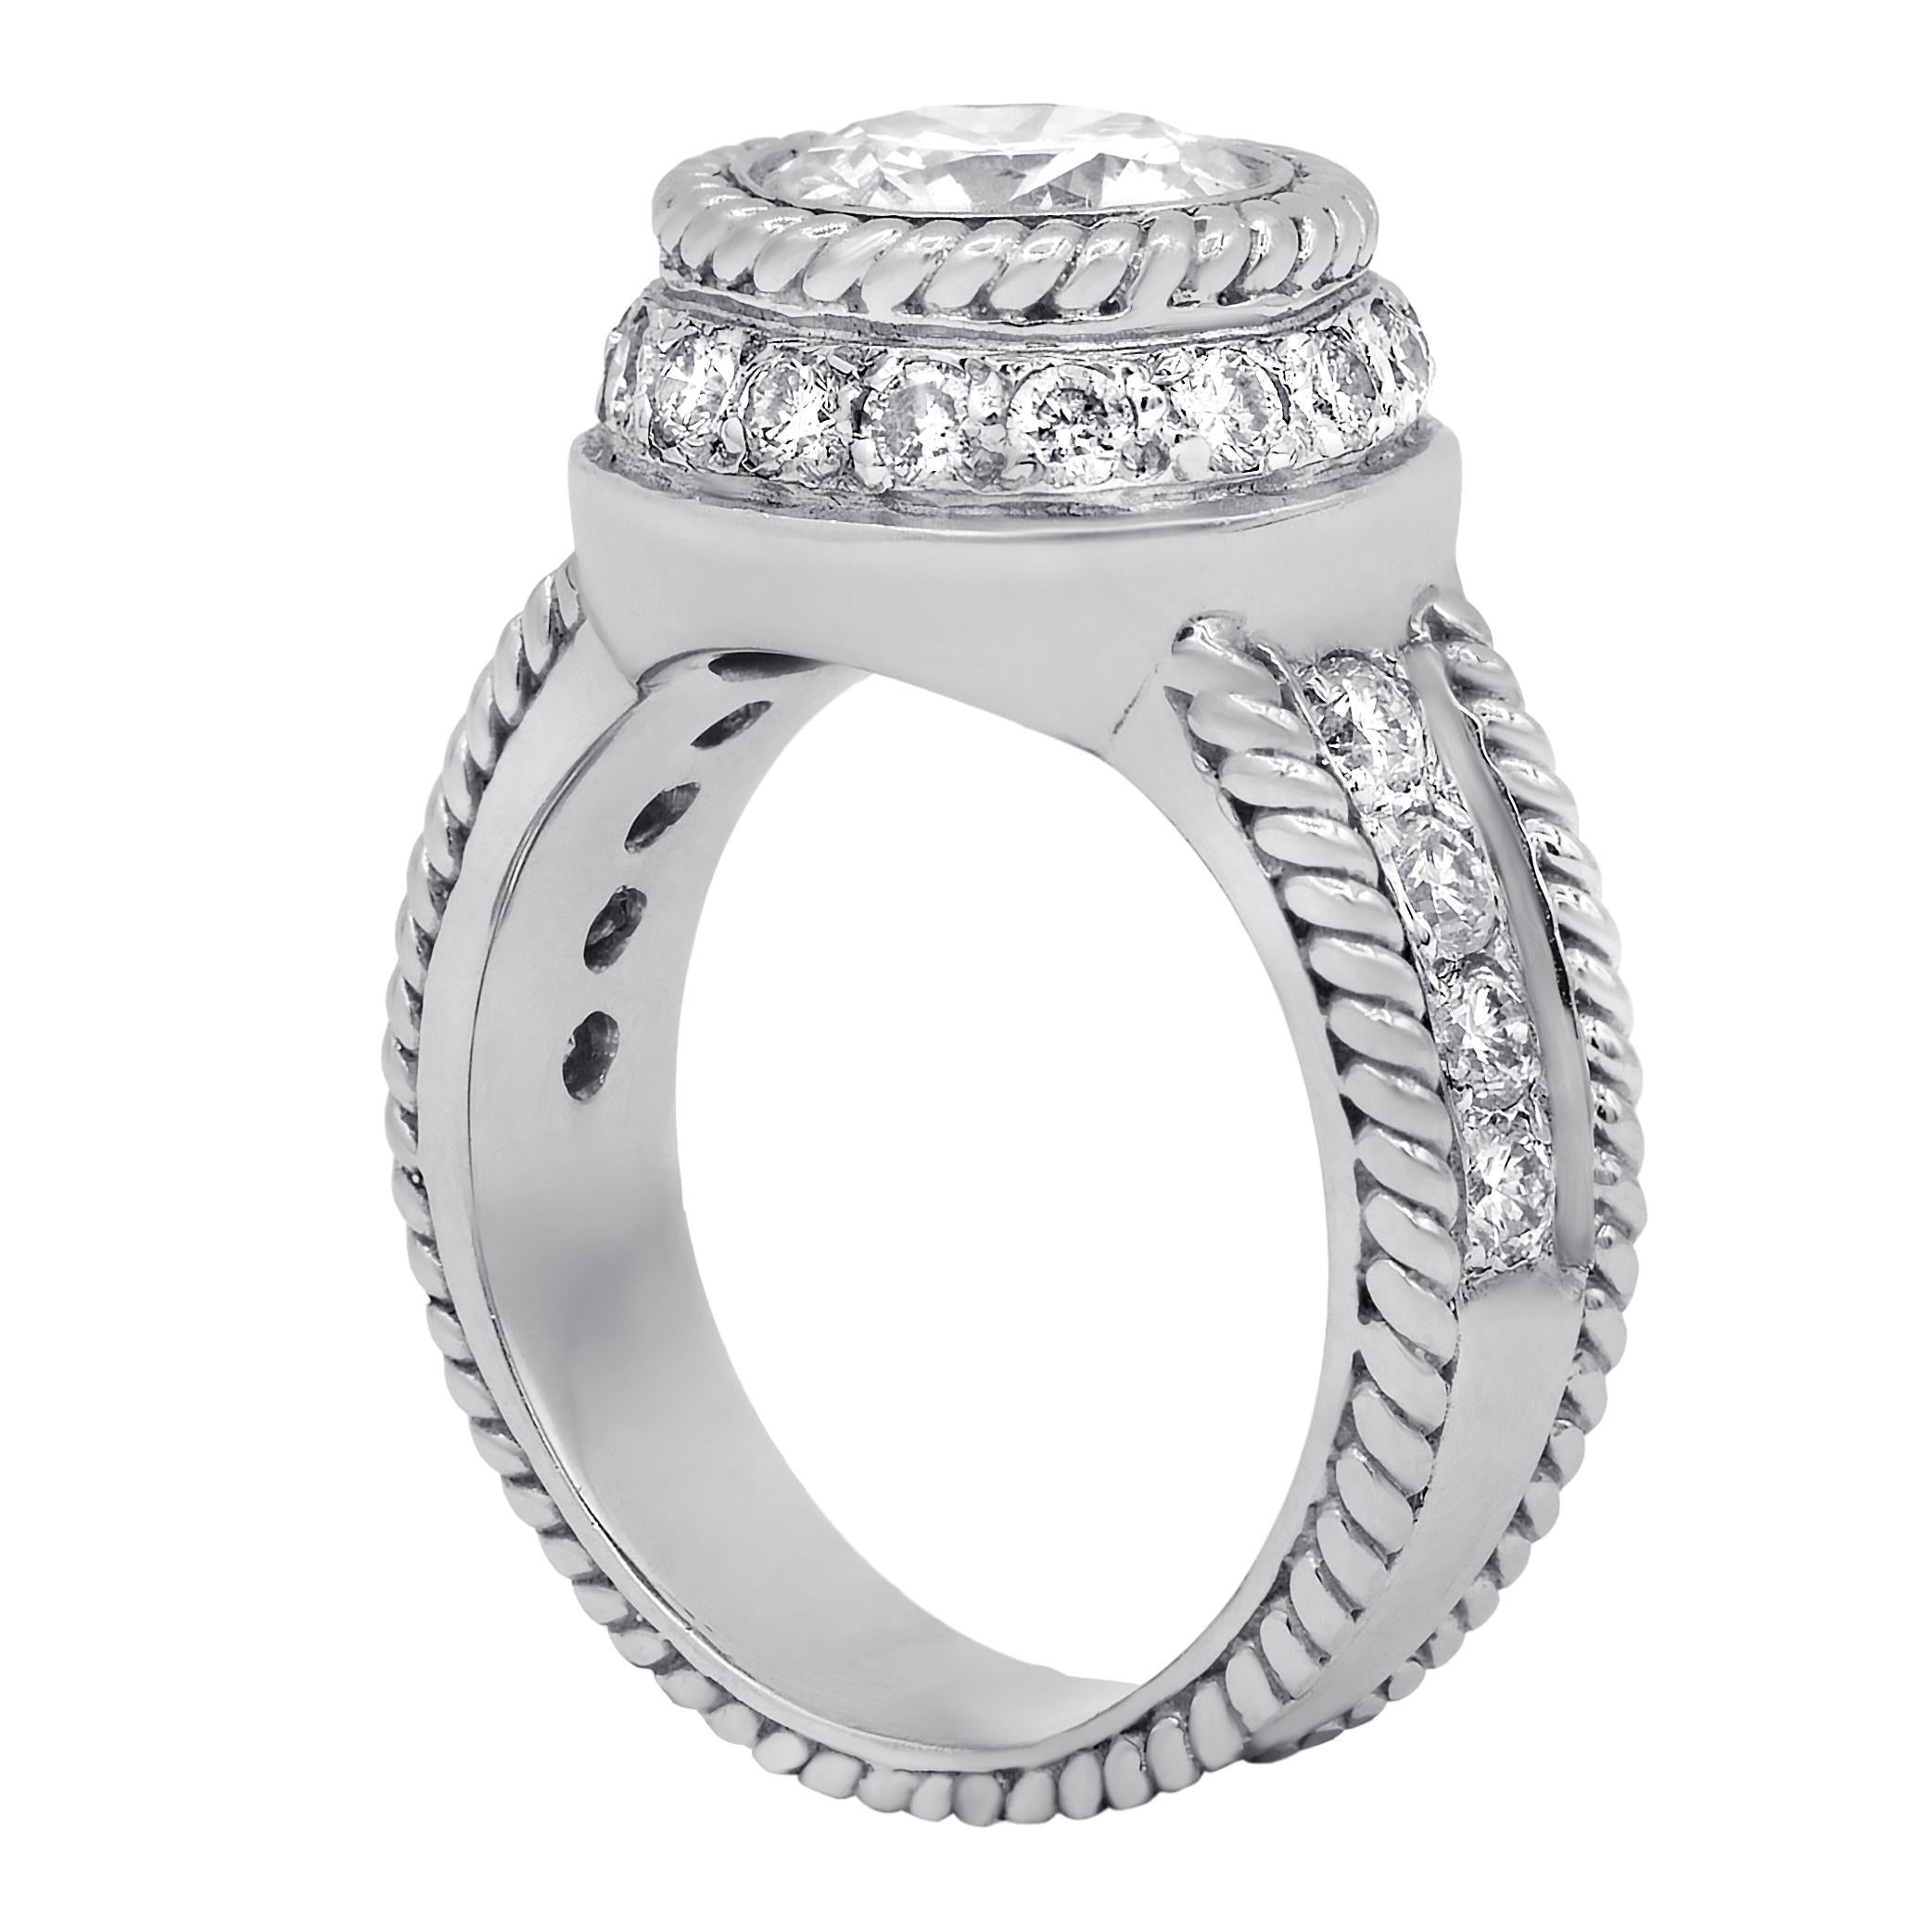 18k white gold ring features 1.70 carat of round agi diamond and 0.93 carat of diamonds on the setting
